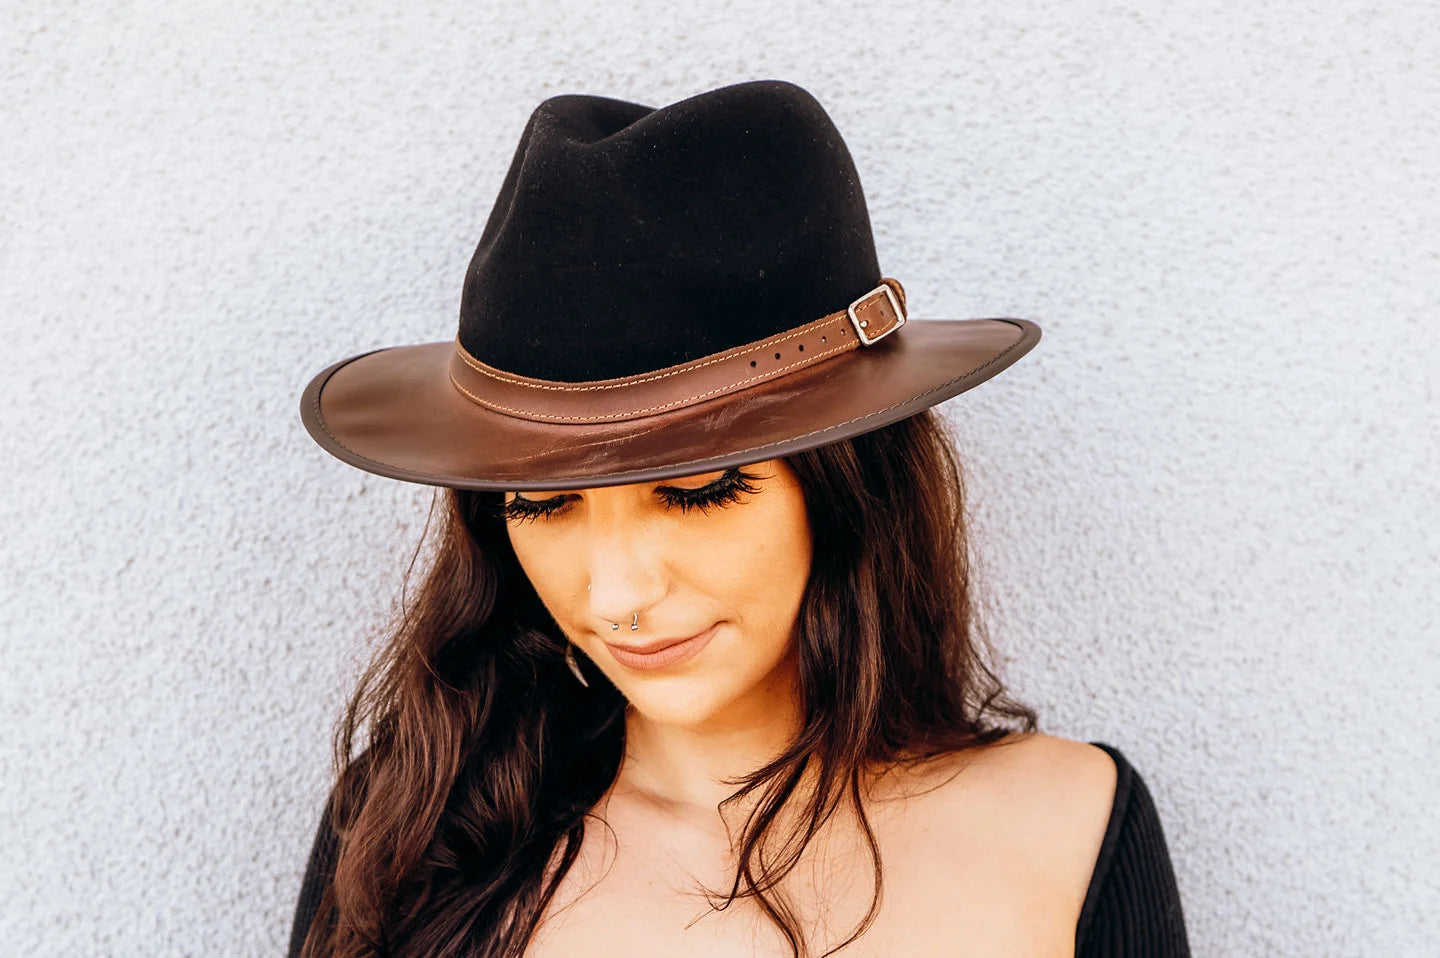 woman in black leaning on a wall wearing a black hat by american hat makers